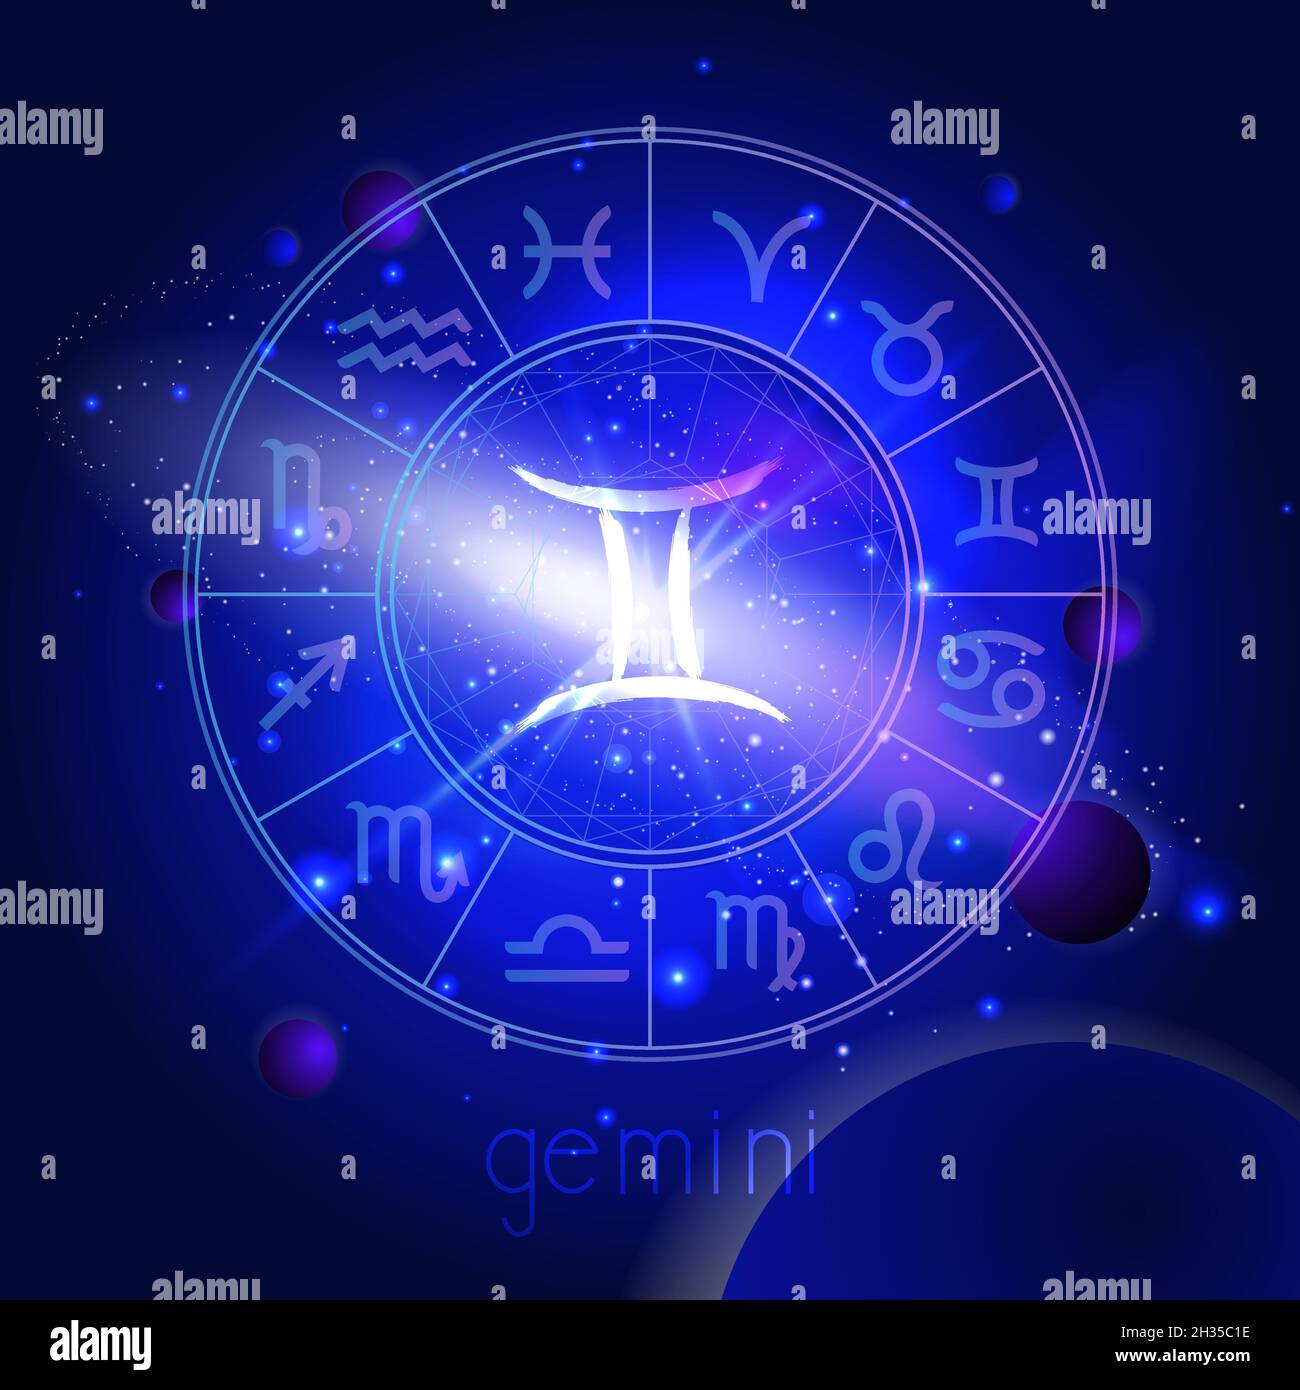 Vector illustration of sign GEMINI with Horoscope circle against the space background with planets and stars. Sacred symbols in blue colors. Stock Vector